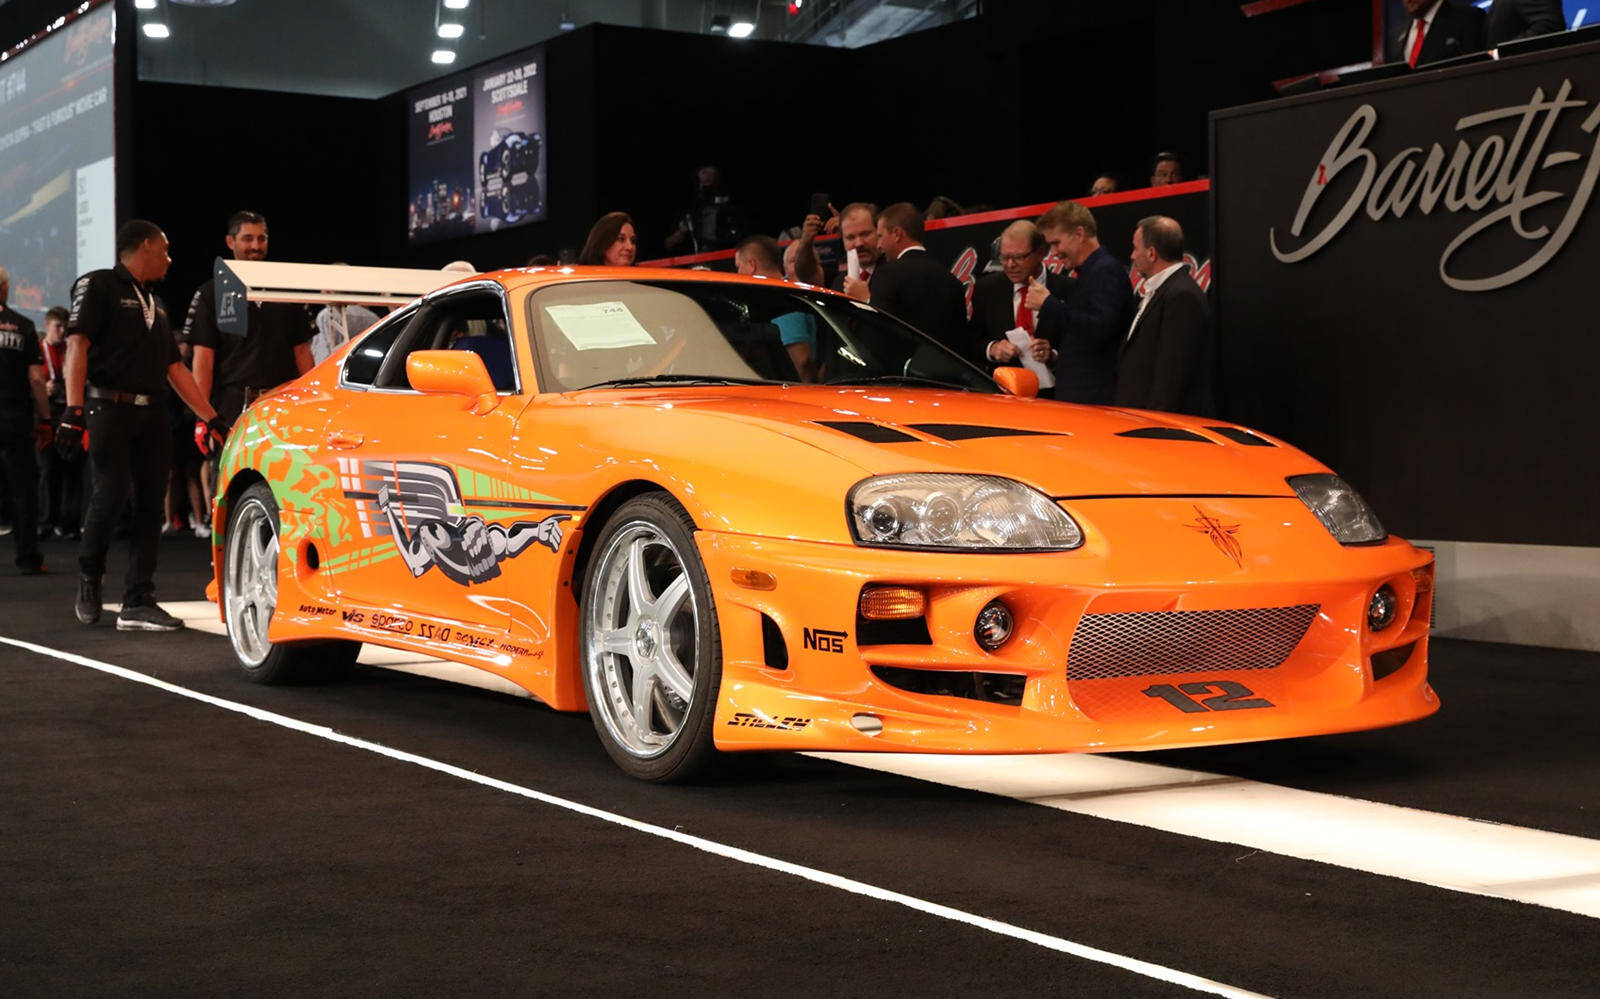 Toyota Supra From “Fast and Furious” Sets Auction Record - The Car